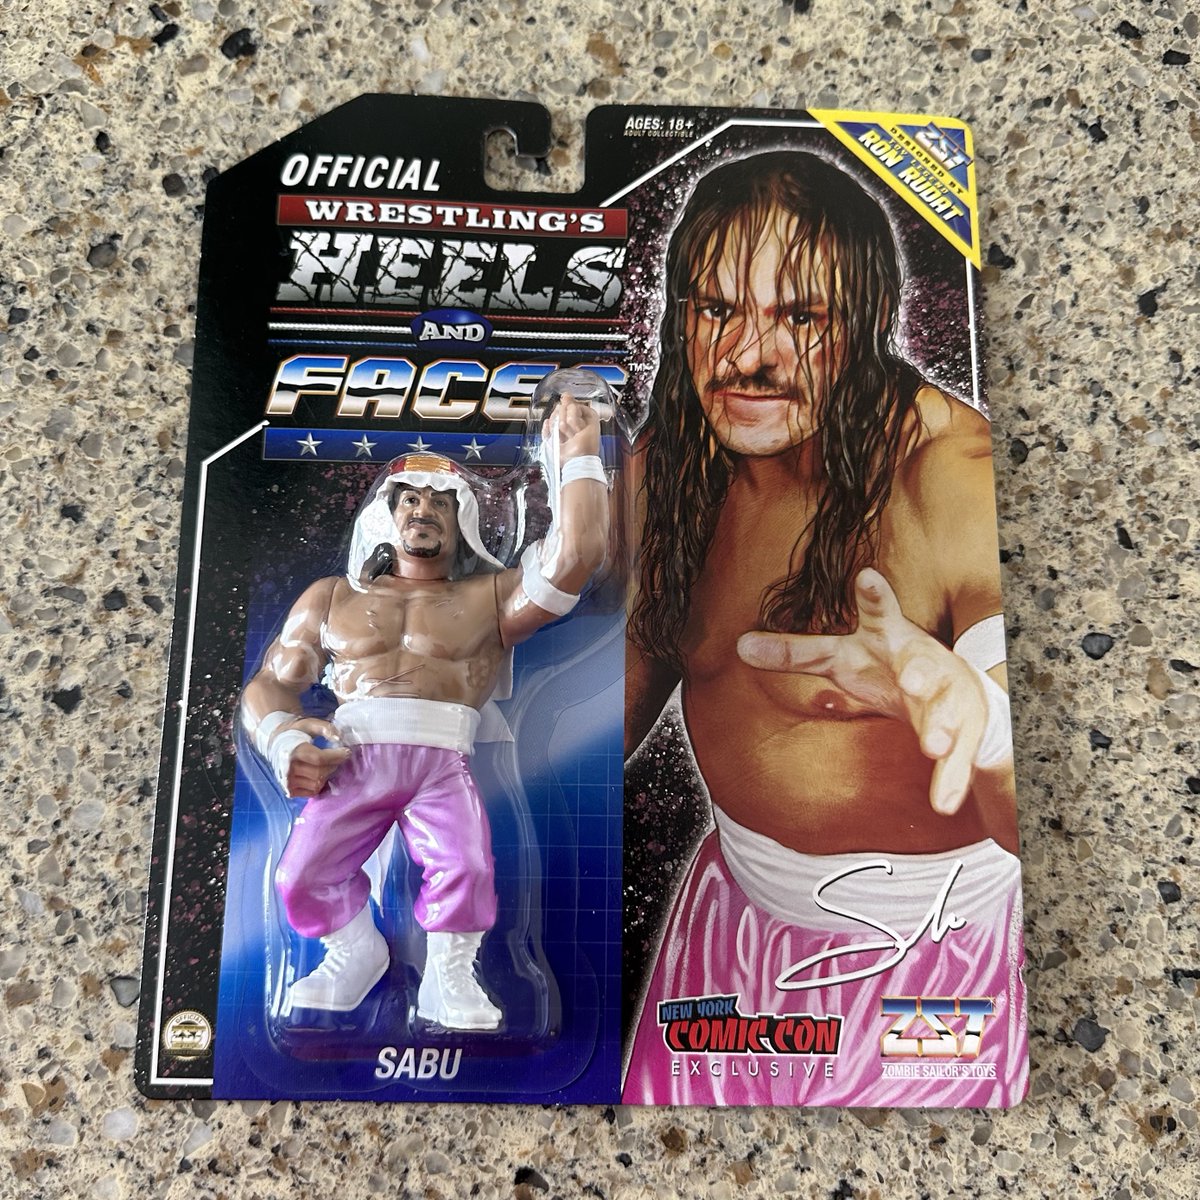 👆 @TheZombieSailor keeps raising the bar with his #HeelsandFaces line. The @NY_Comic_Con exclusive Sabu is next level.